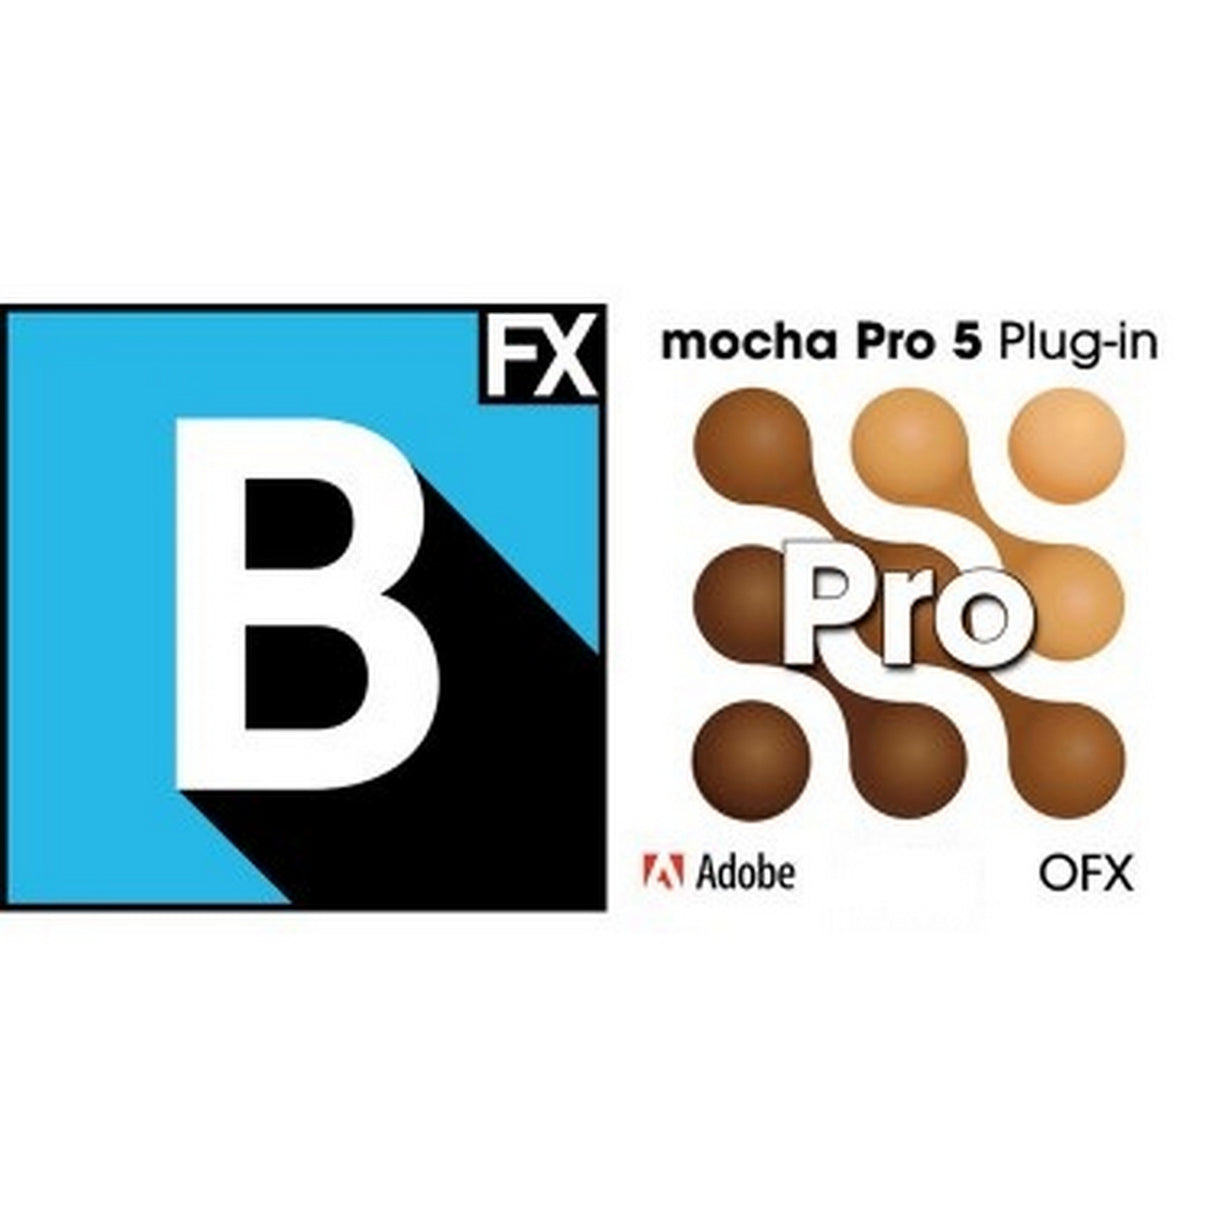 Boris FX Continuum Complete 10 and mocha Pro 5 Bundle | Video Software Adobe and OFX